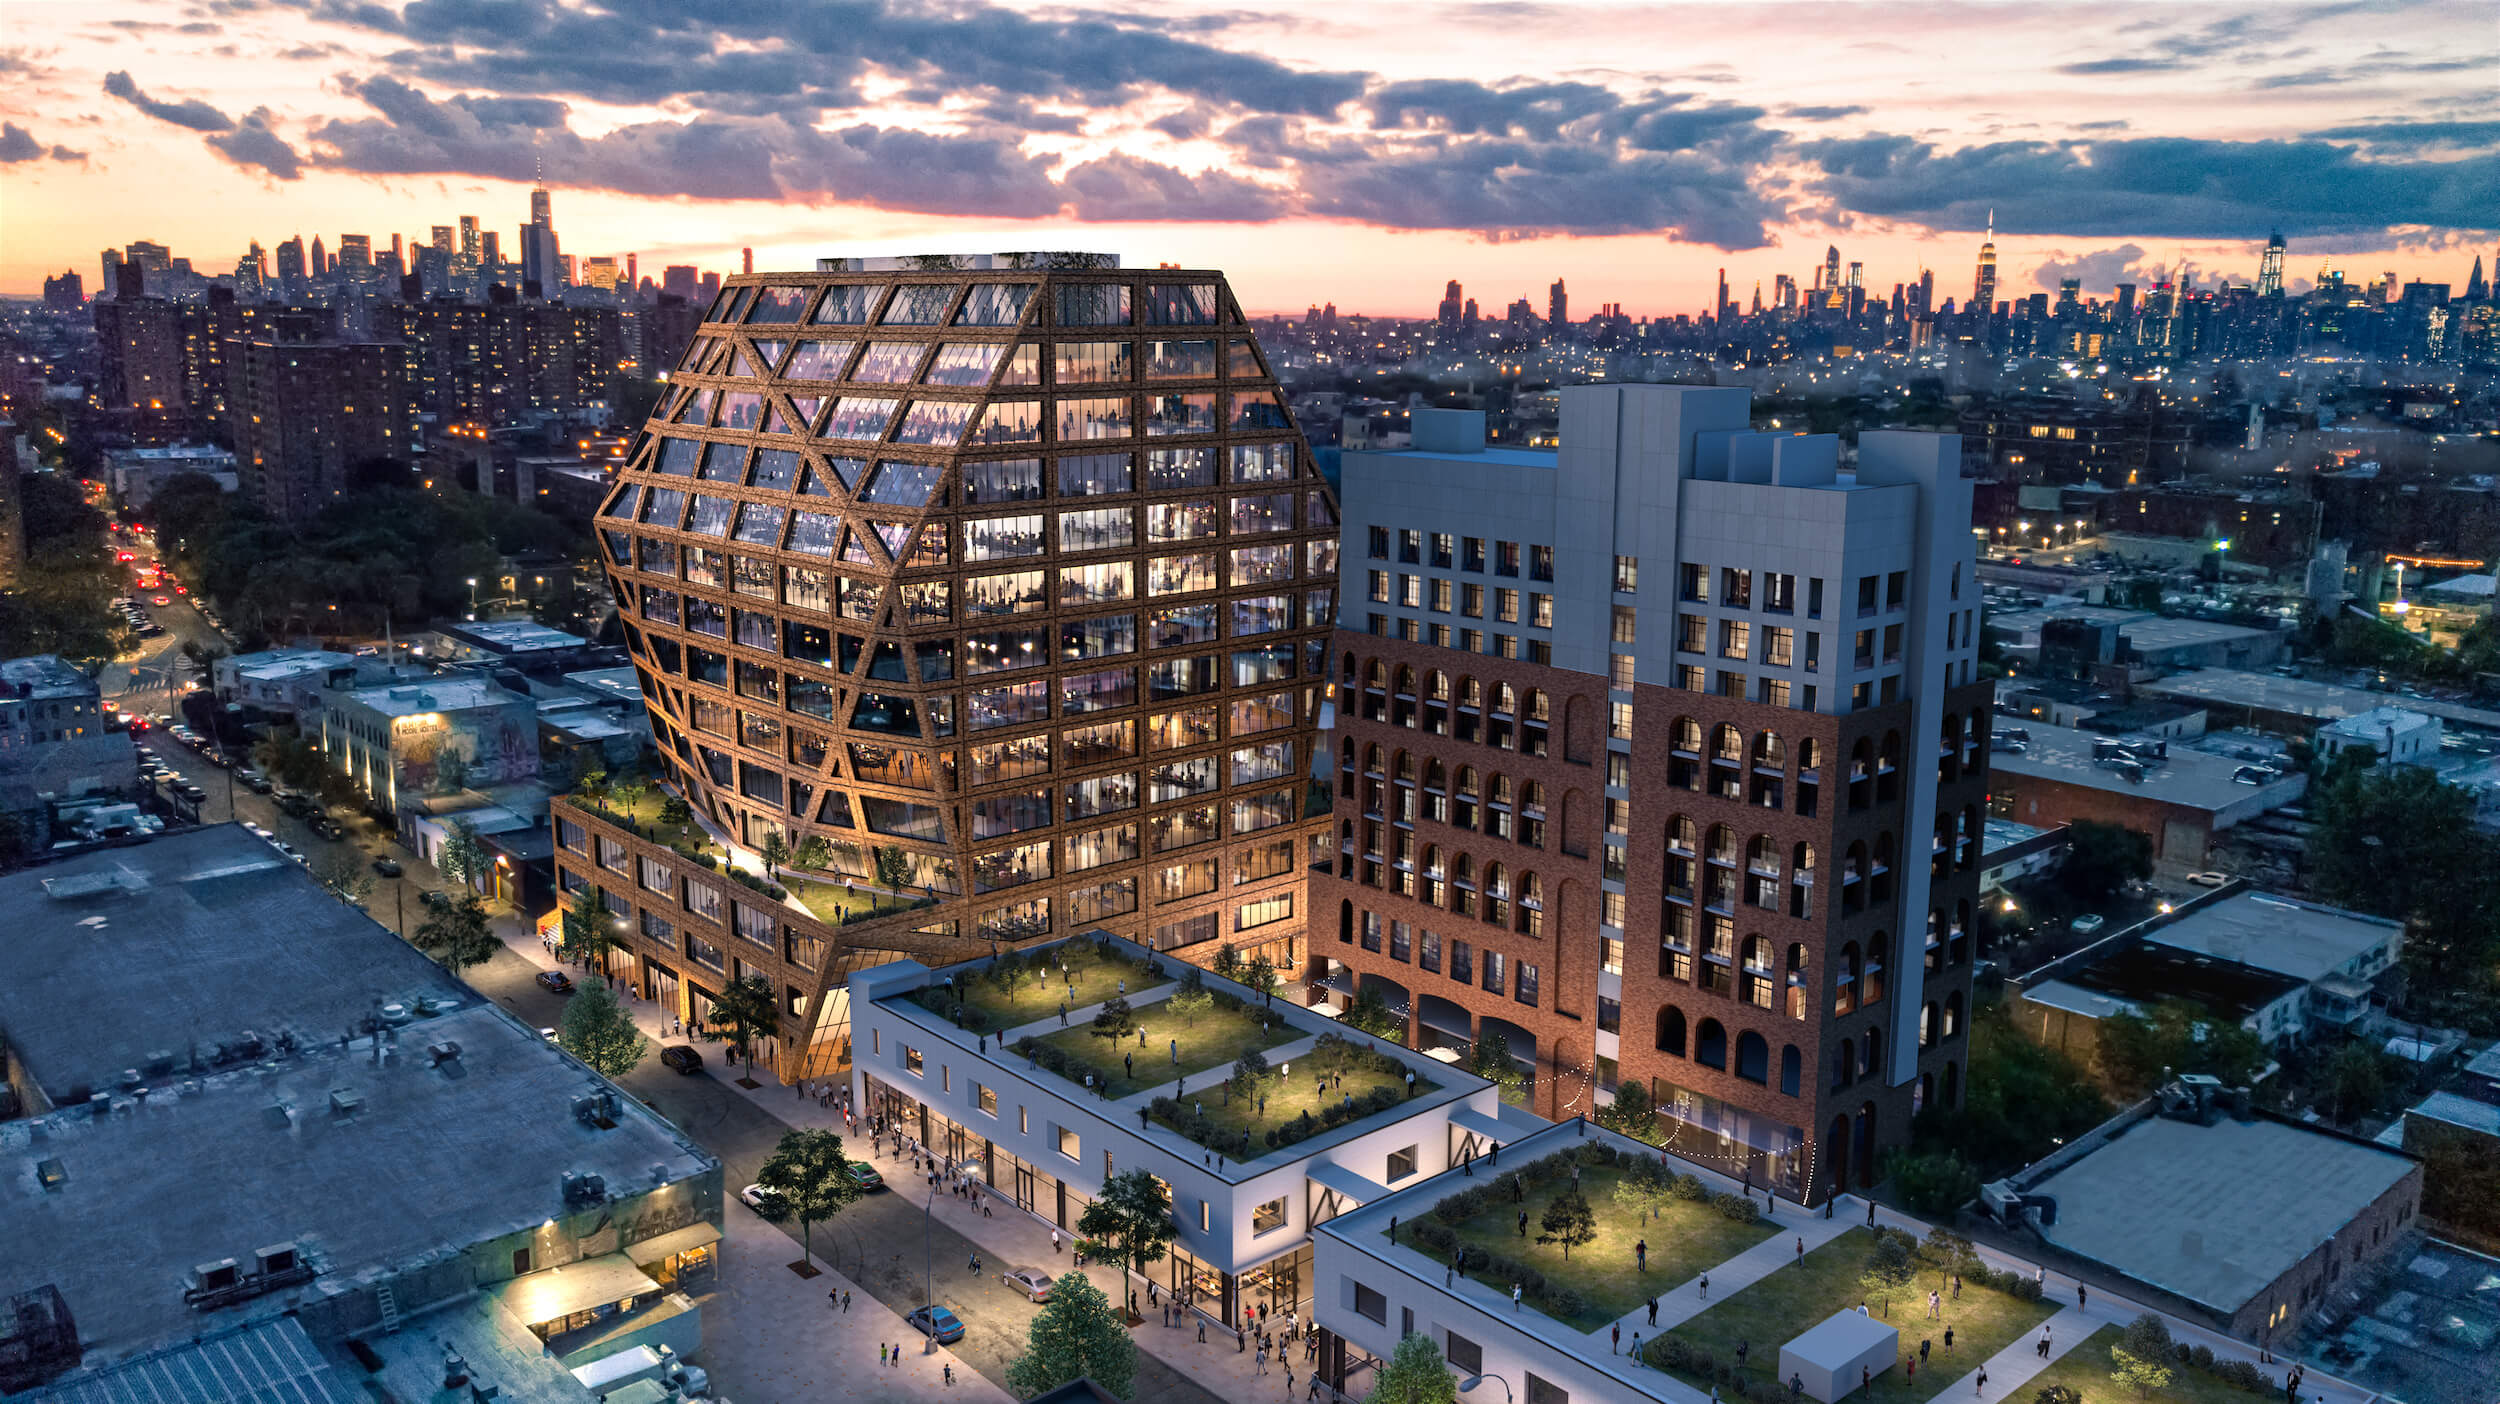 aerial illustration of an office campus in industrial brooklyn